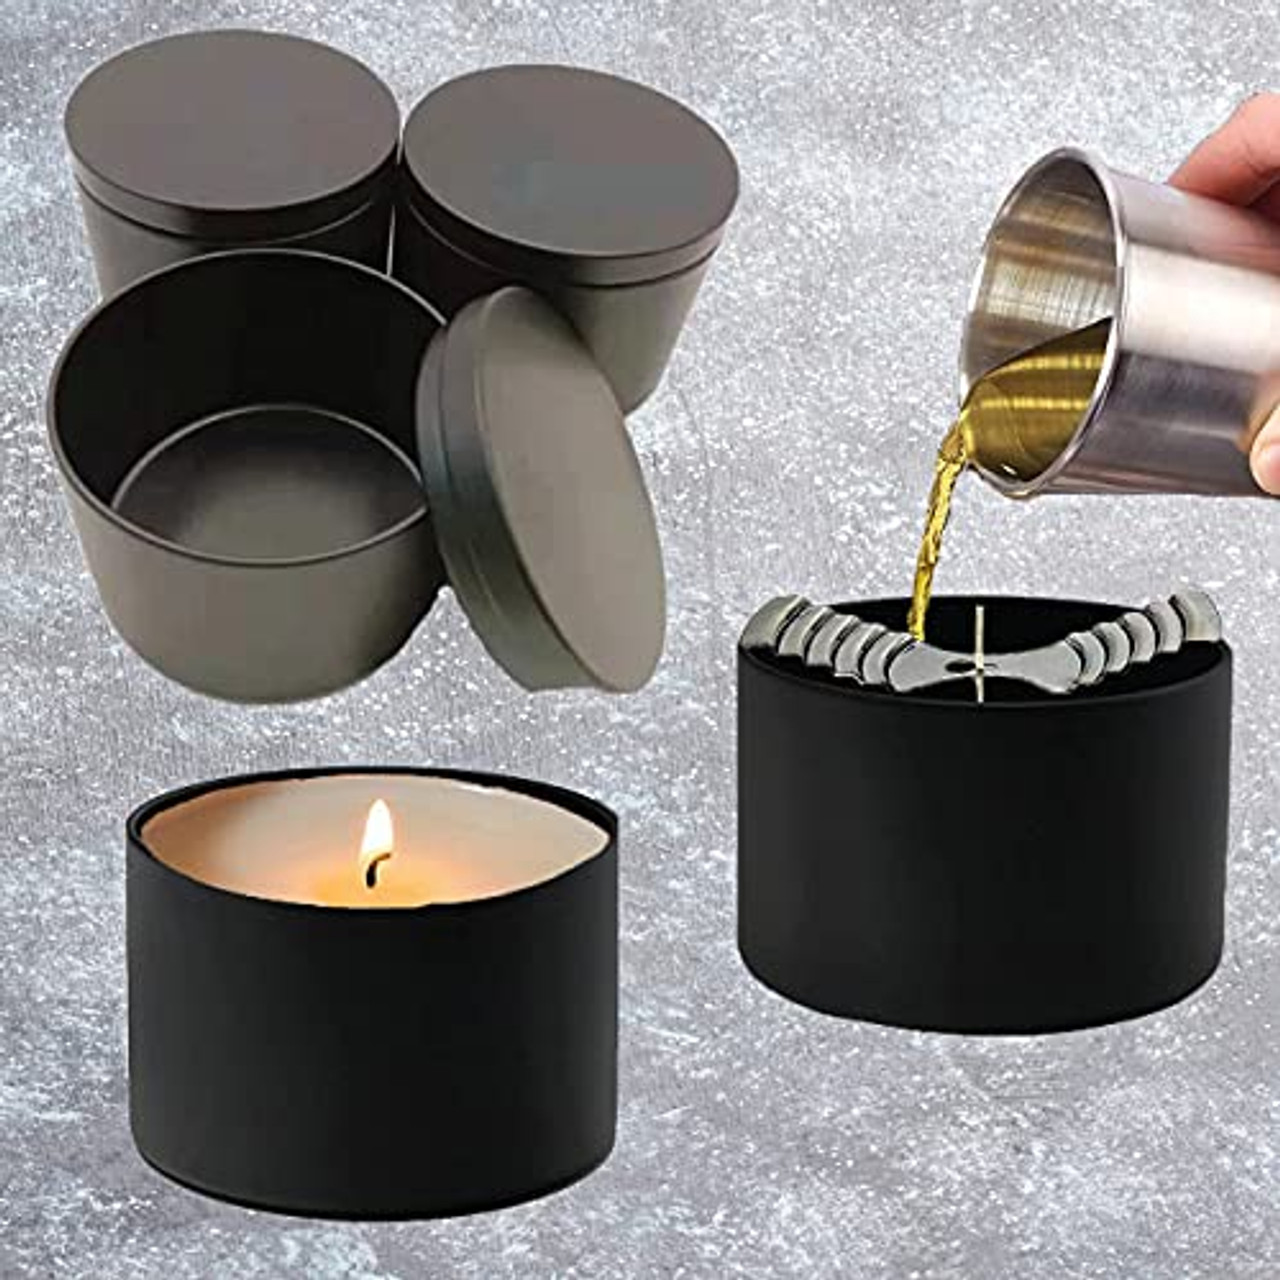 LEXONIX 24pcs All Black 8oz Candle Tins Candle Making Supplies Candle tin  Set Candle containers Empty